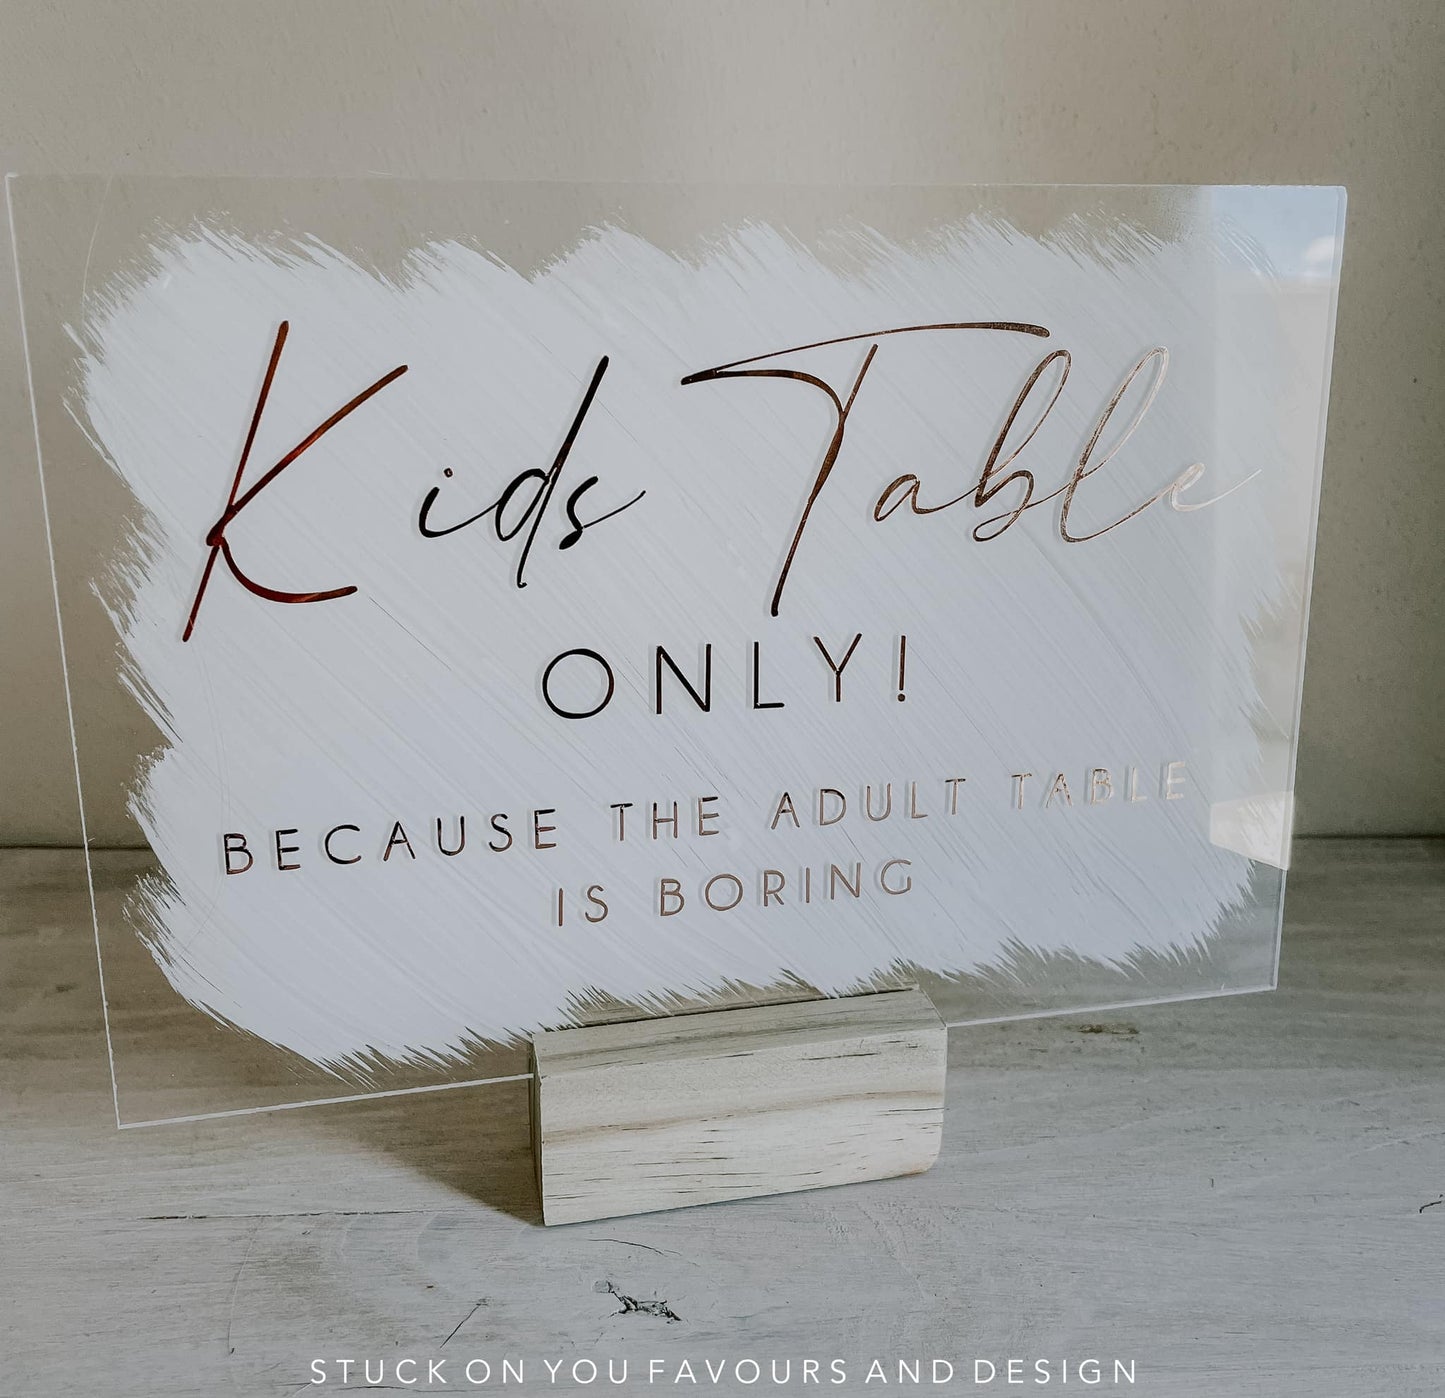 Kids Table Only - A5 Acrylic Table Talker